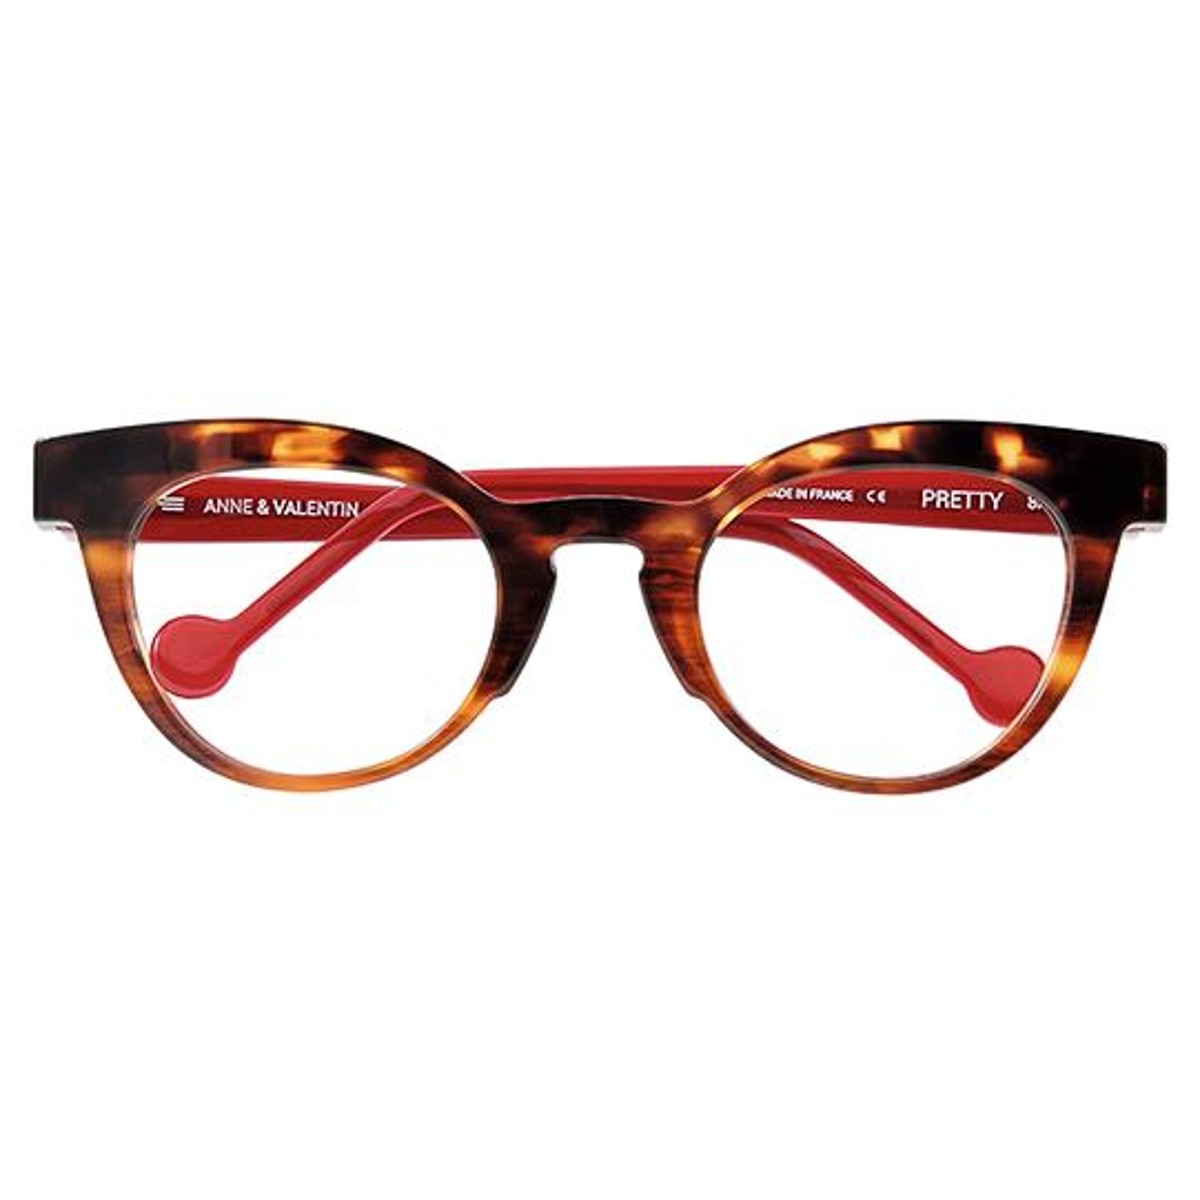 Anne et Valentin - Pretty 8A24 Tortoise with Red Temples